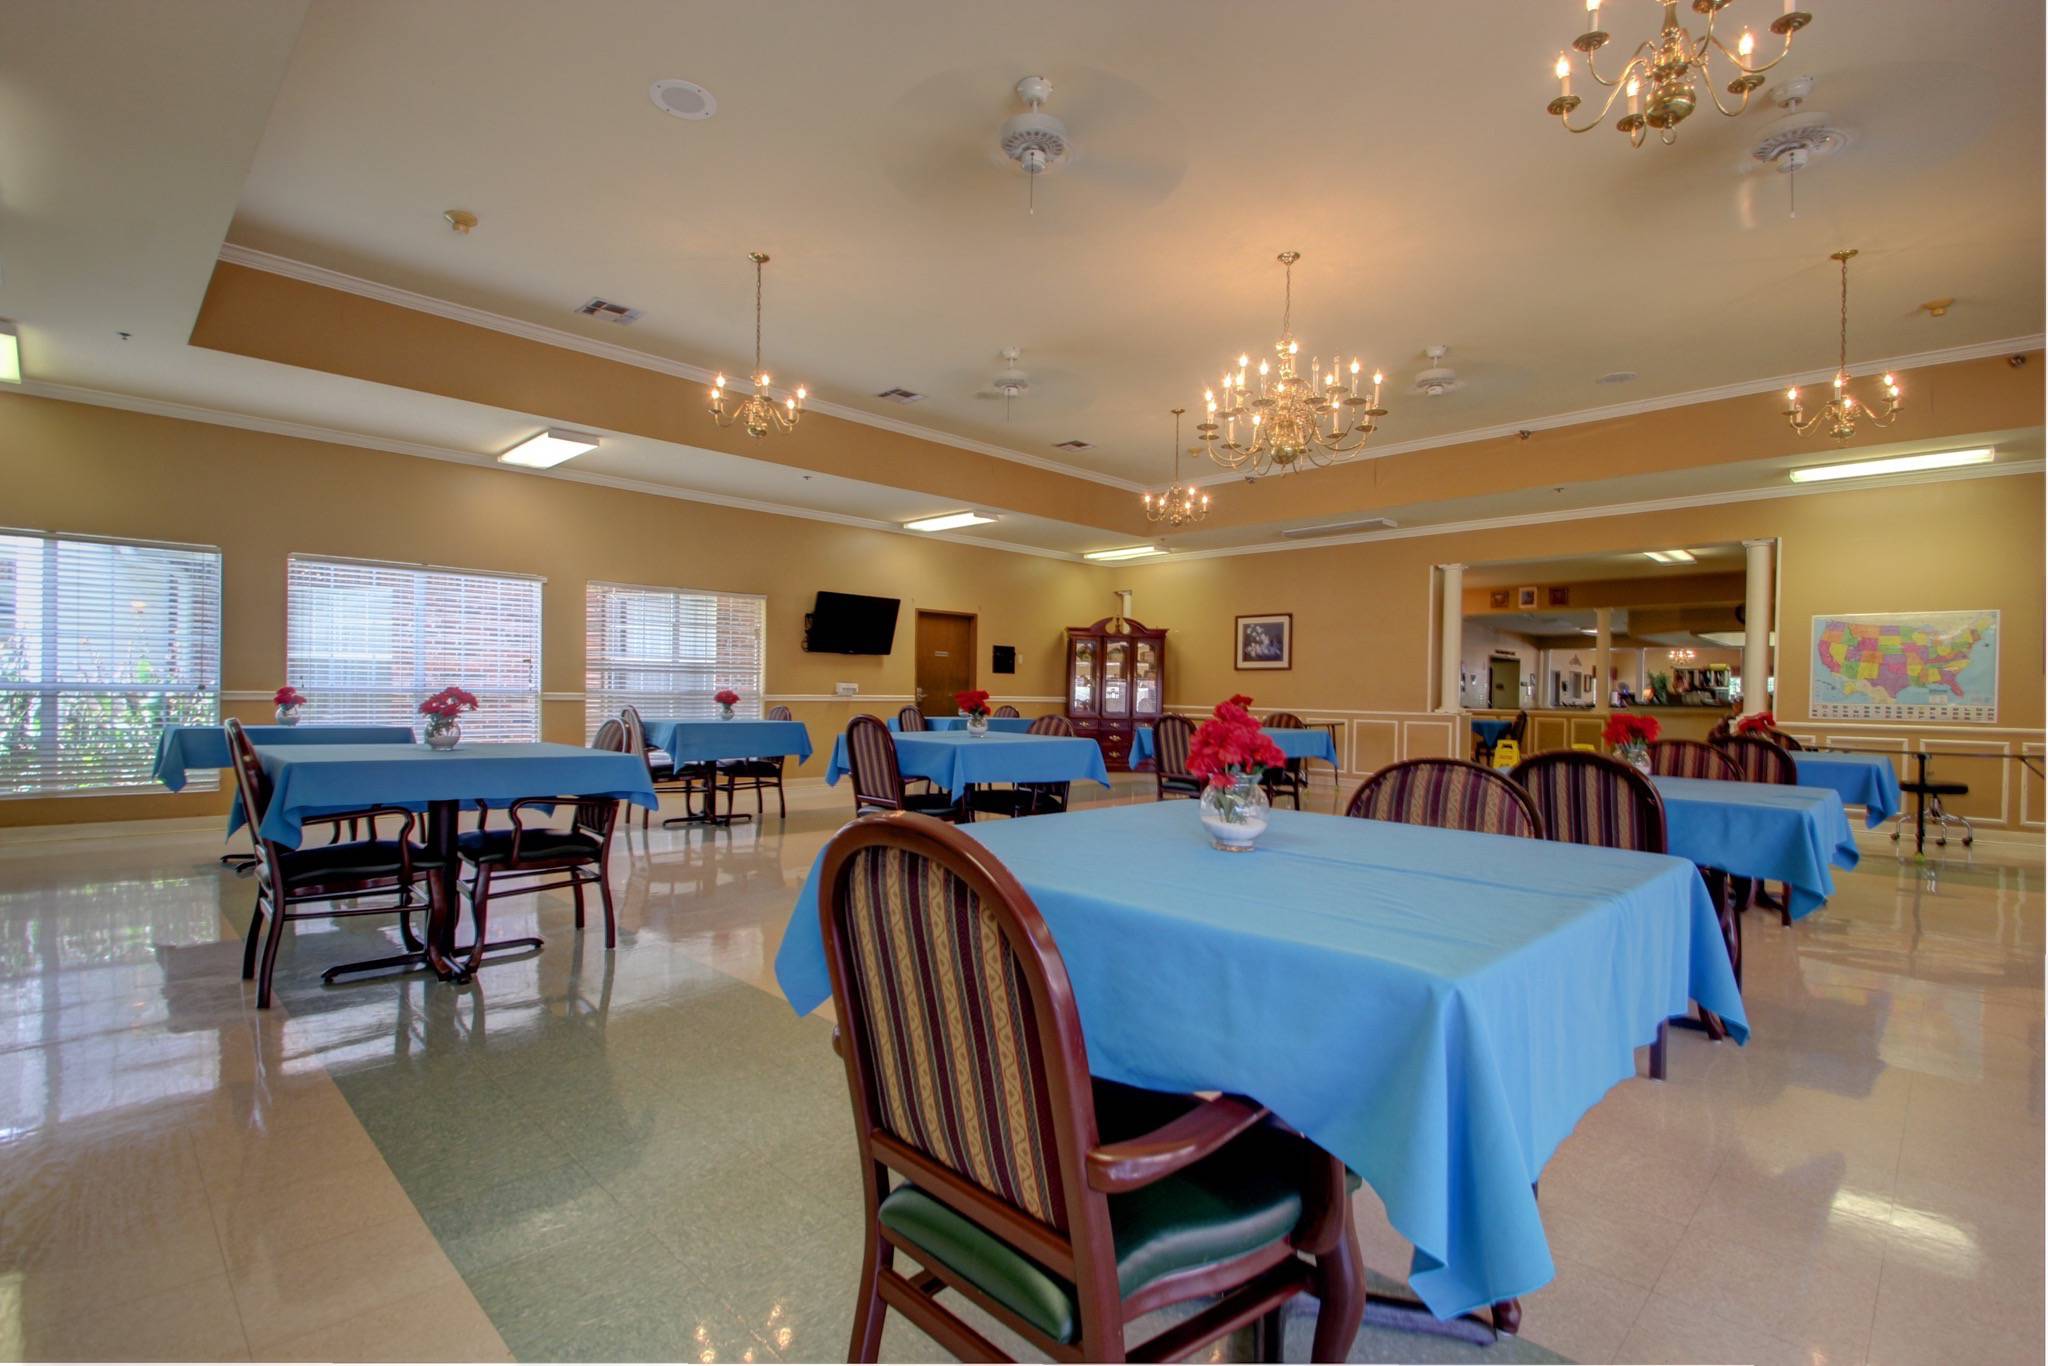 Abbotsford WI Nursing Home Physical Therapy Services